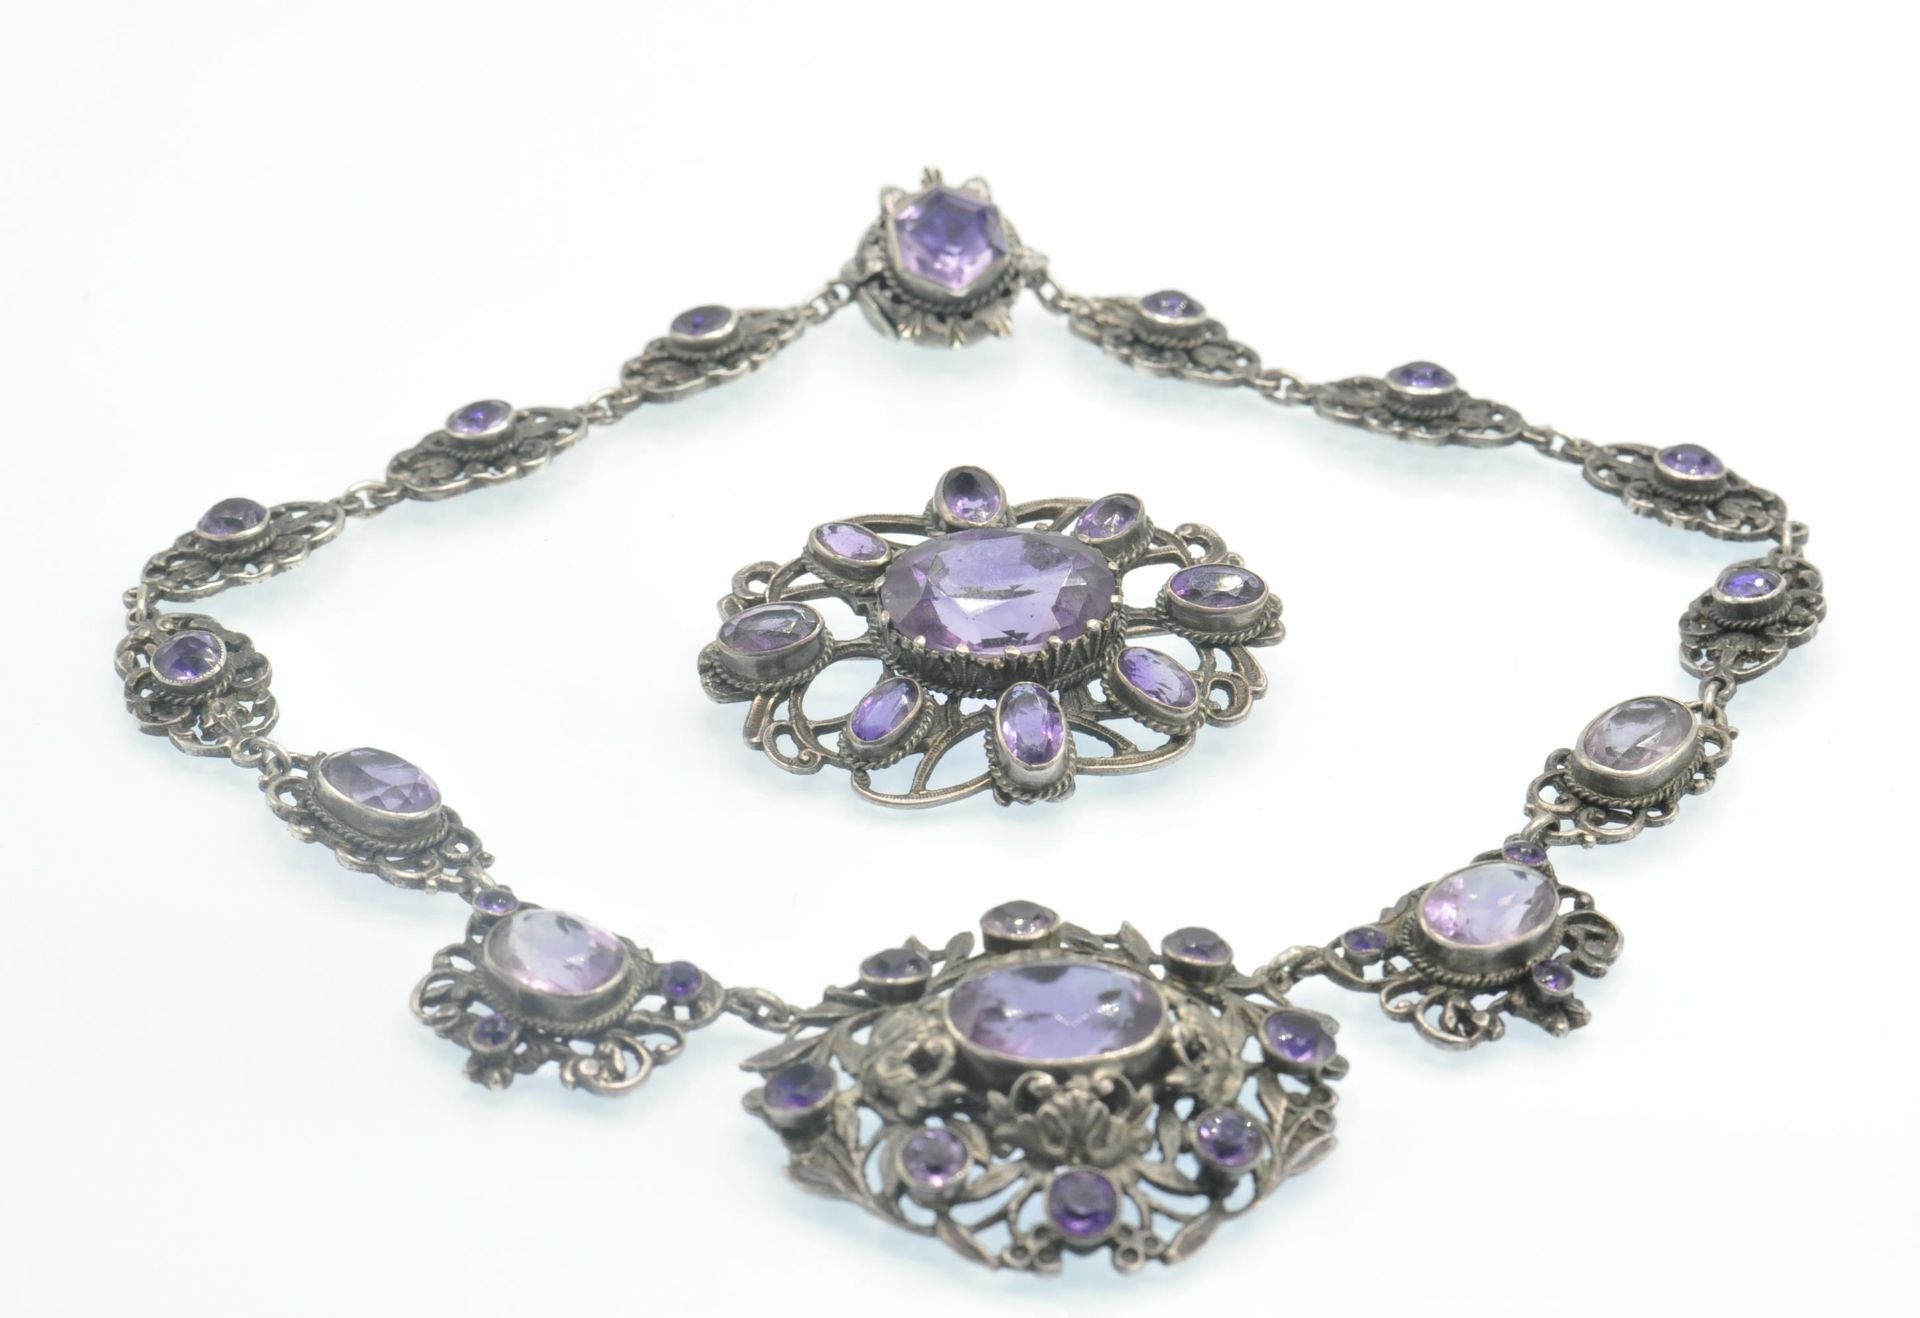 An Early 20th Century Silver & Amethyst Choker Necklace & Brooch